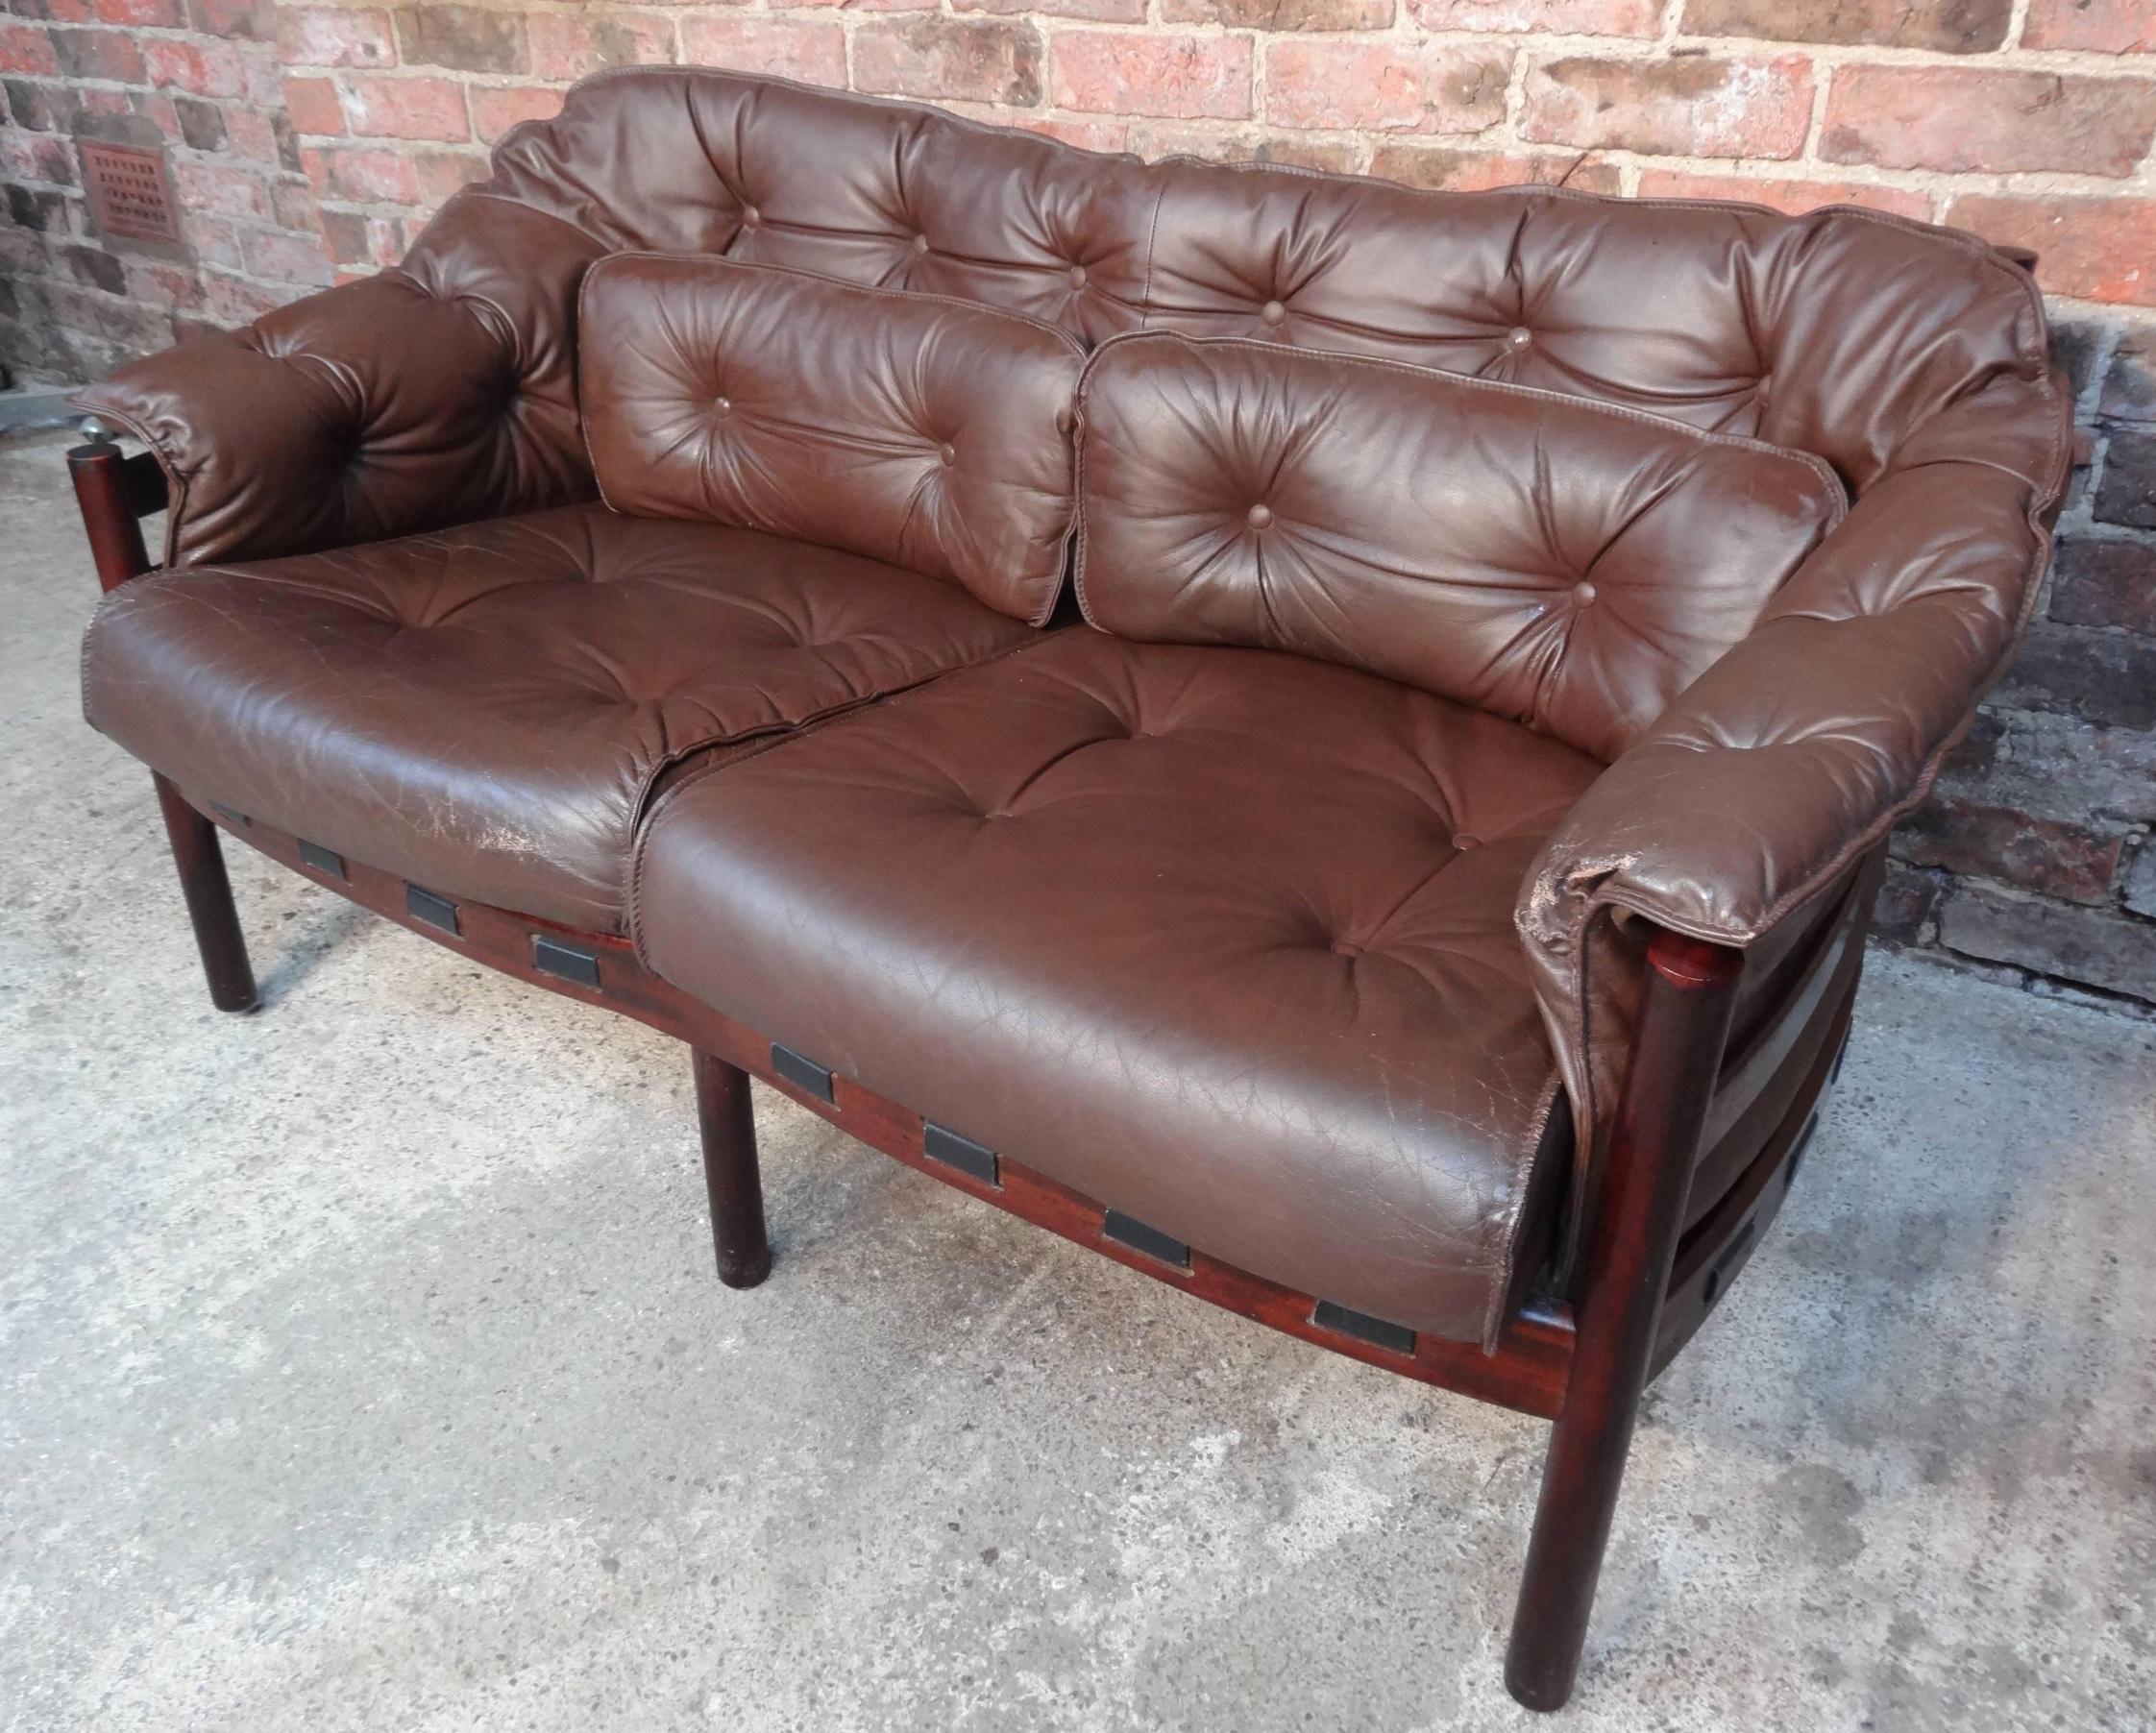 Great Sven Ellekear for Coja brown leather sofa is in very good vintage condition, leather is in very good condition as well, this Classic Danish designed sofa are the antiques of the future and look great in any decor.

Measures: seat height